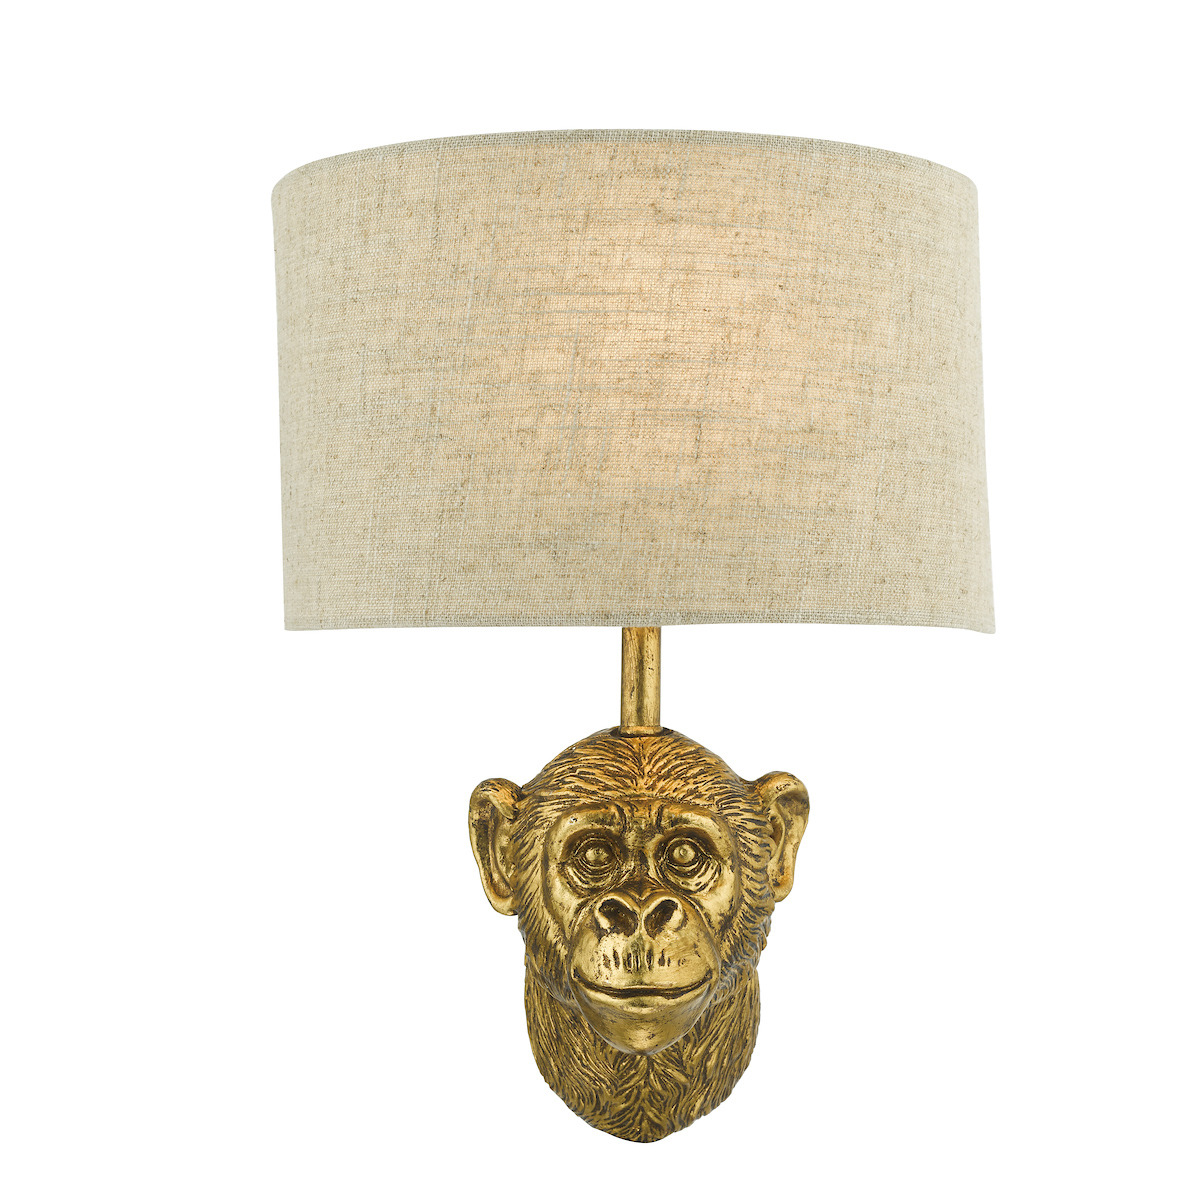 Dar Lighting RAU0735 Raul Monkey Wall Light In Gold Finish With Natural Linen Shade